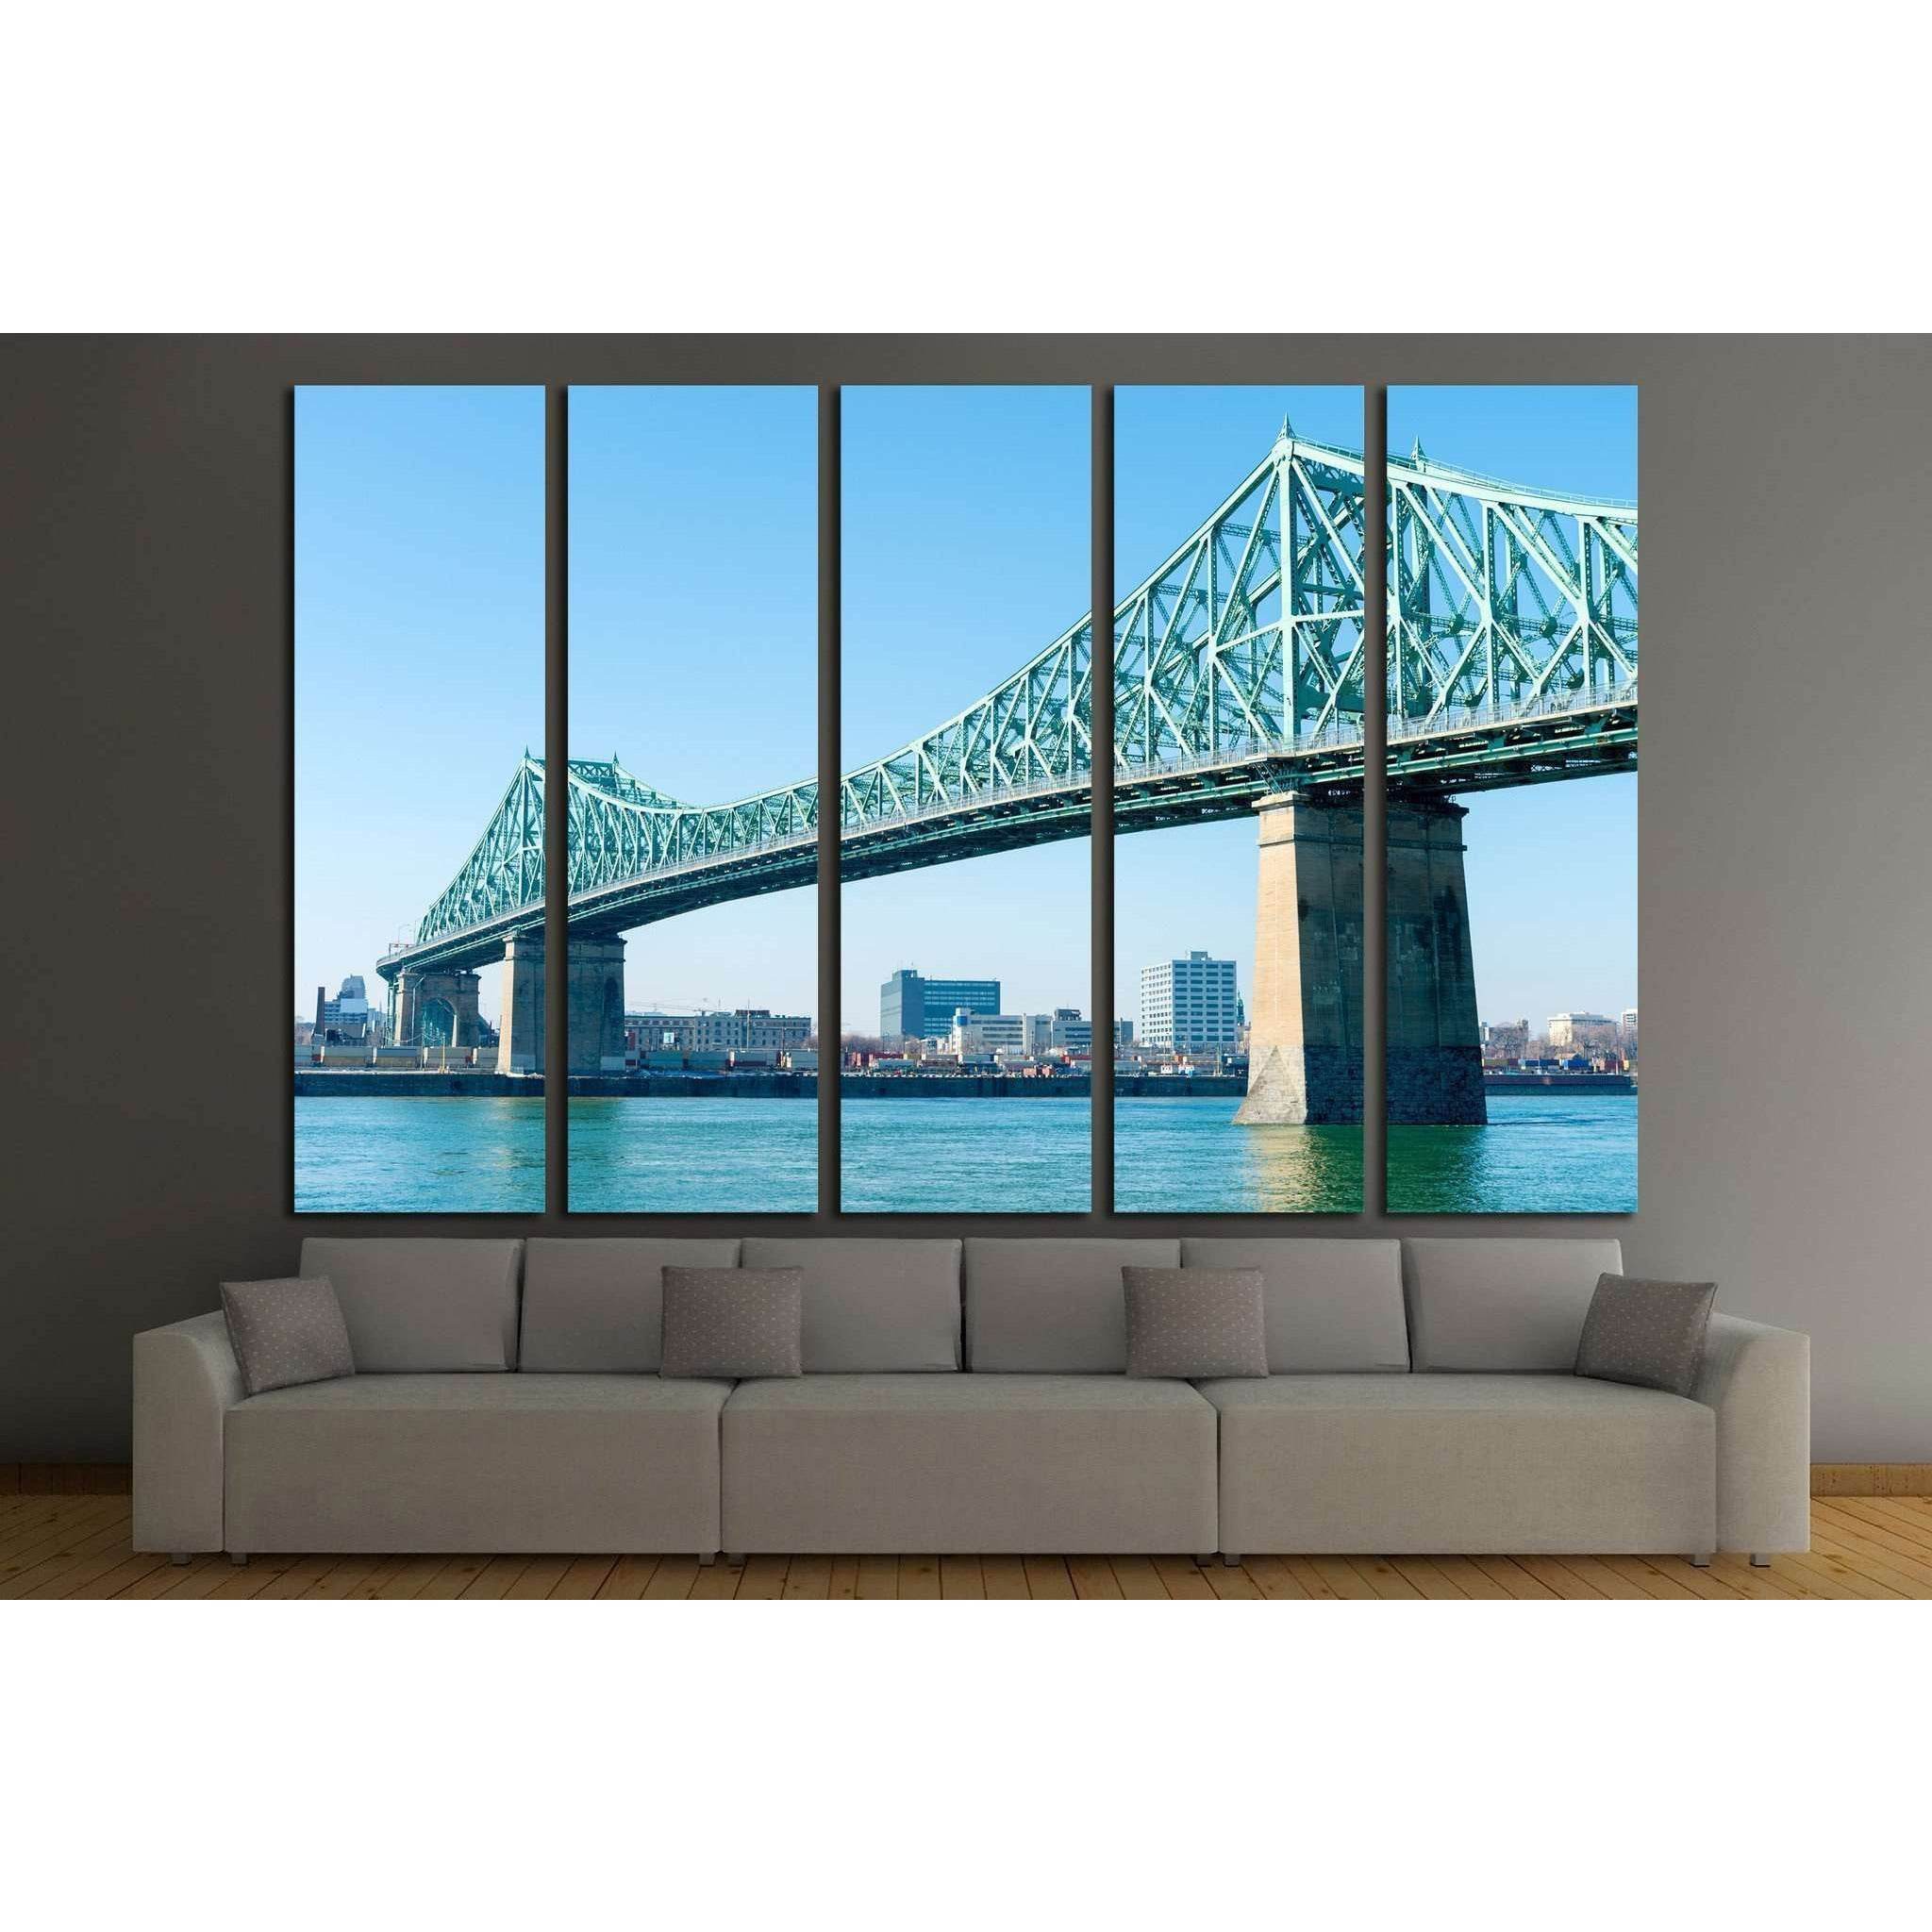 Jacques-Cartier Bridge in Montreal, at sunset №2016 Ready to Hang Canvas Print